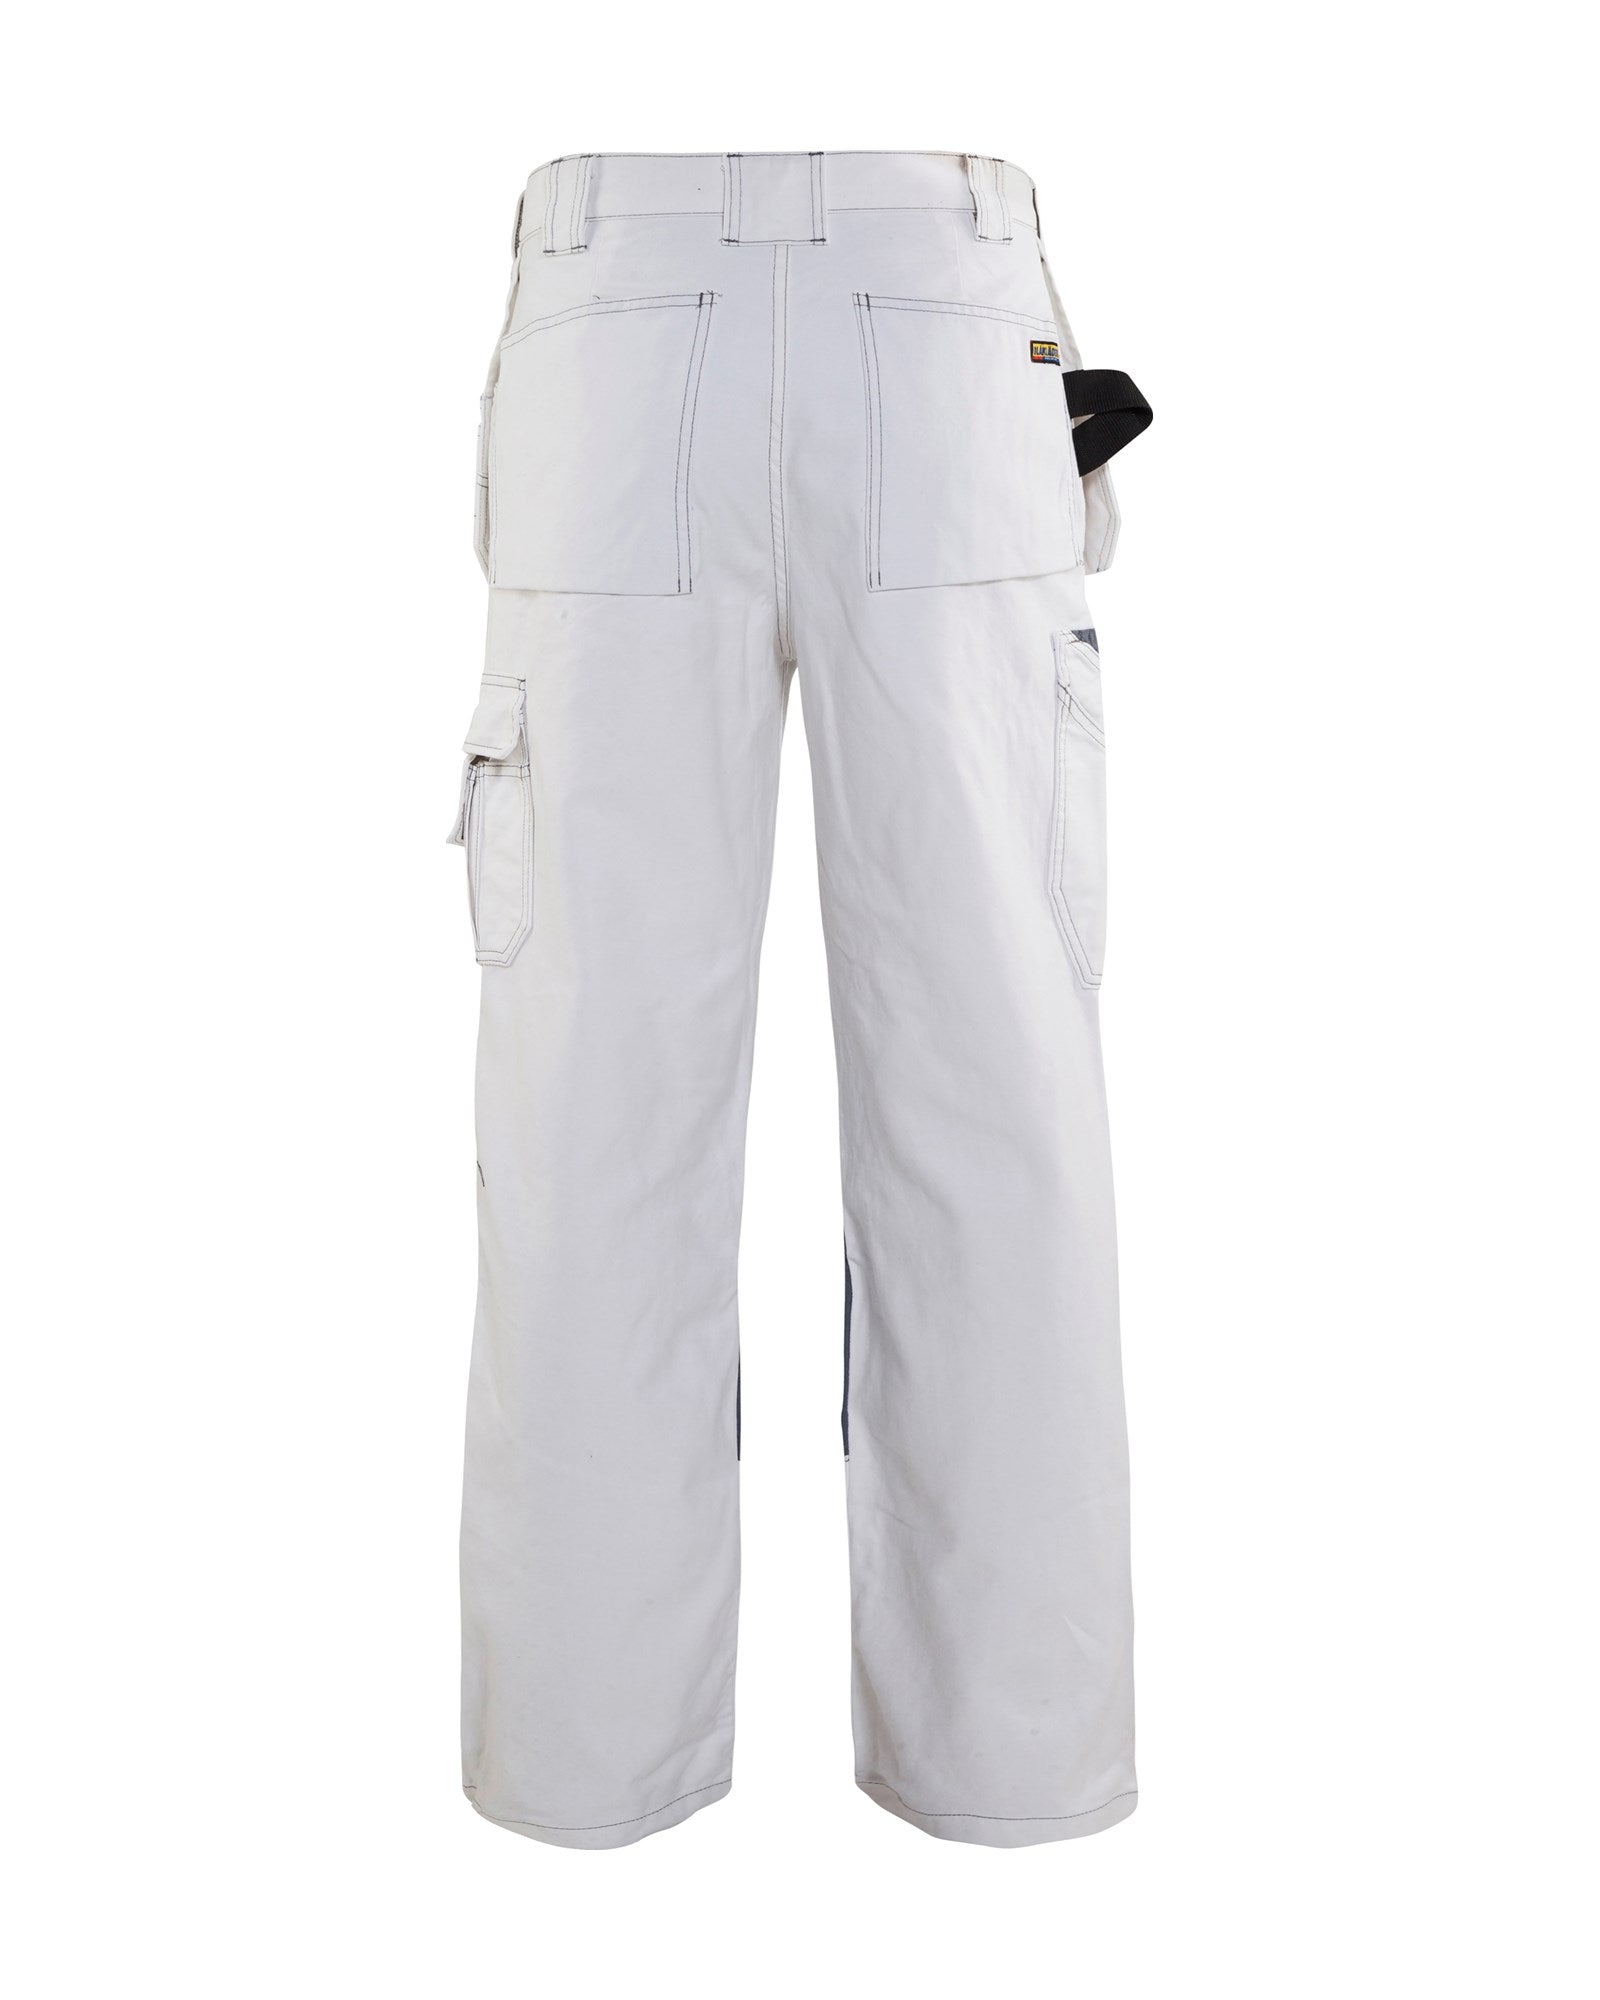 Buy 26 Waist - 31 inch Leg, White : Painters Decorators Cargo Work Trousers  Pants Knee Pad Pockets XS - 3XL S817[26''-28''] [Reg 31''] Online at Low  Prices in India - Amazon.in